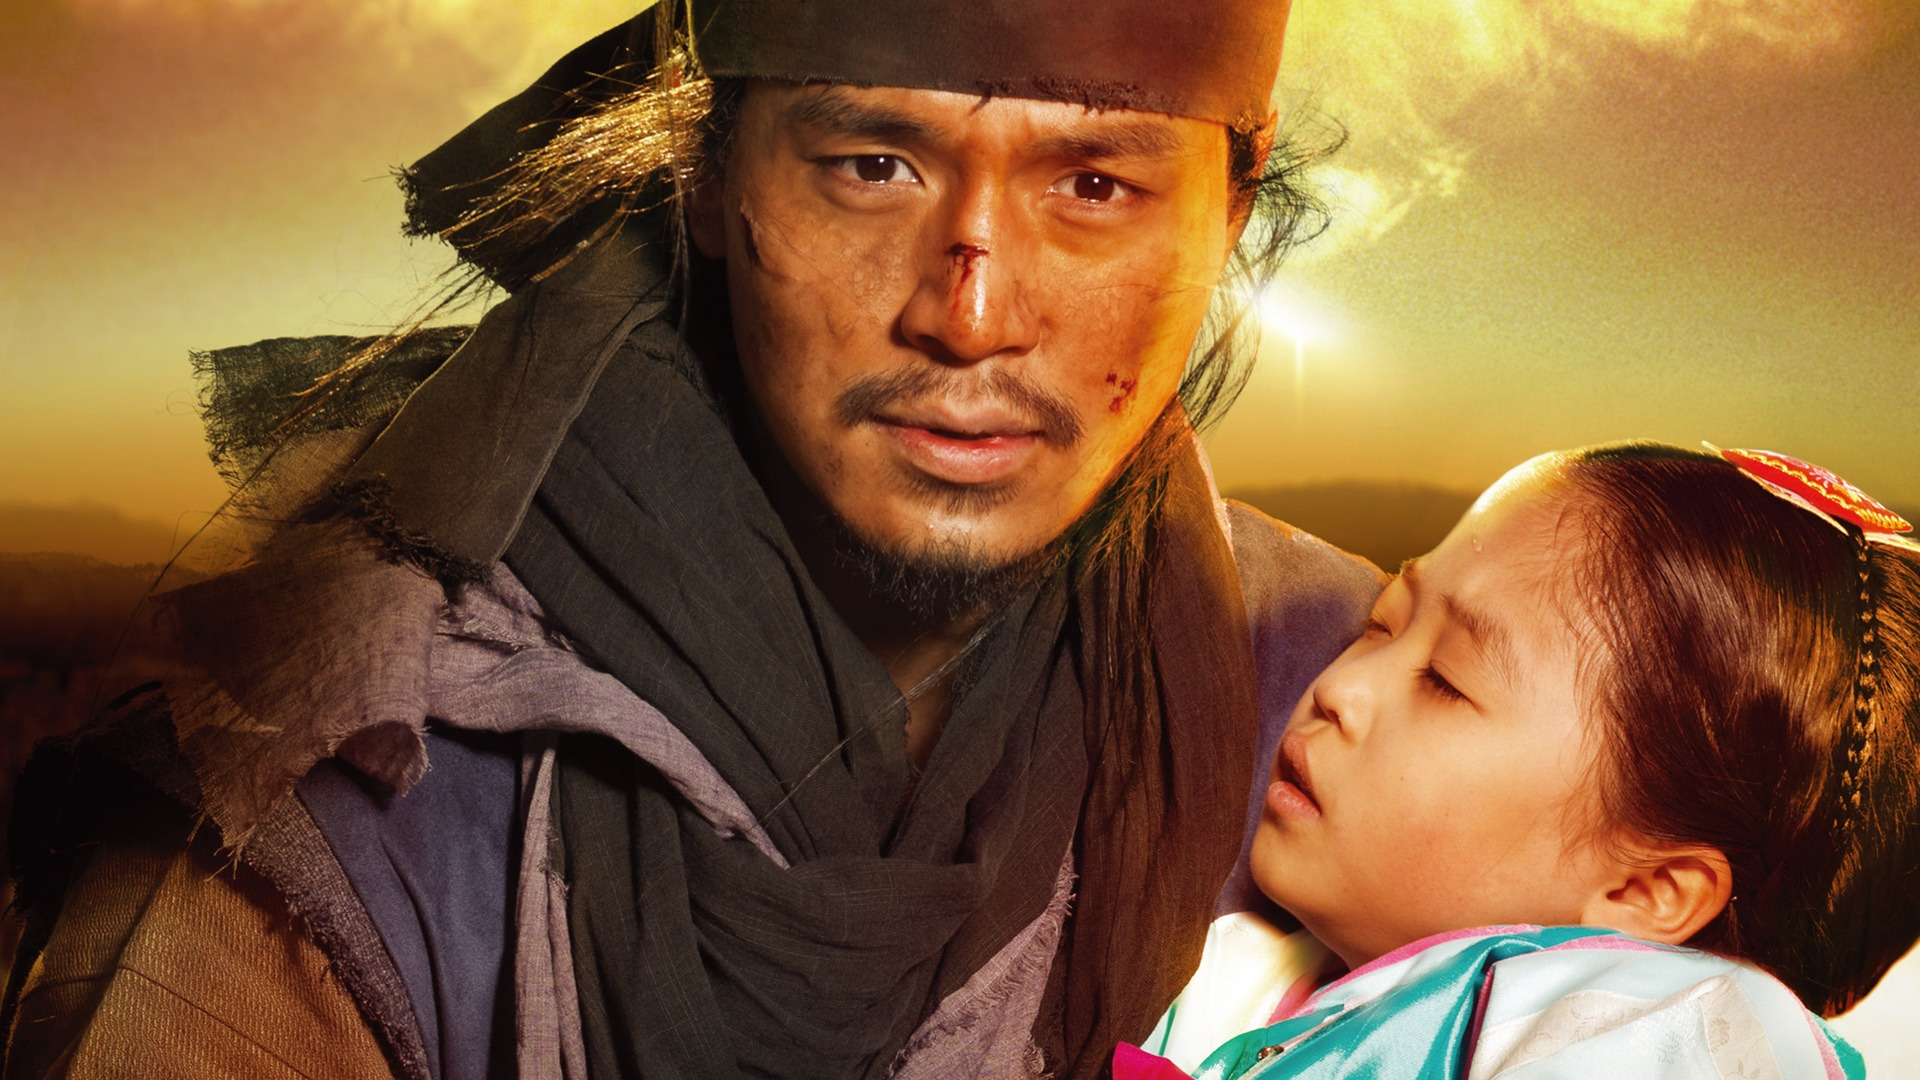 Show Heaven's Will: The Fugitive of Joseon